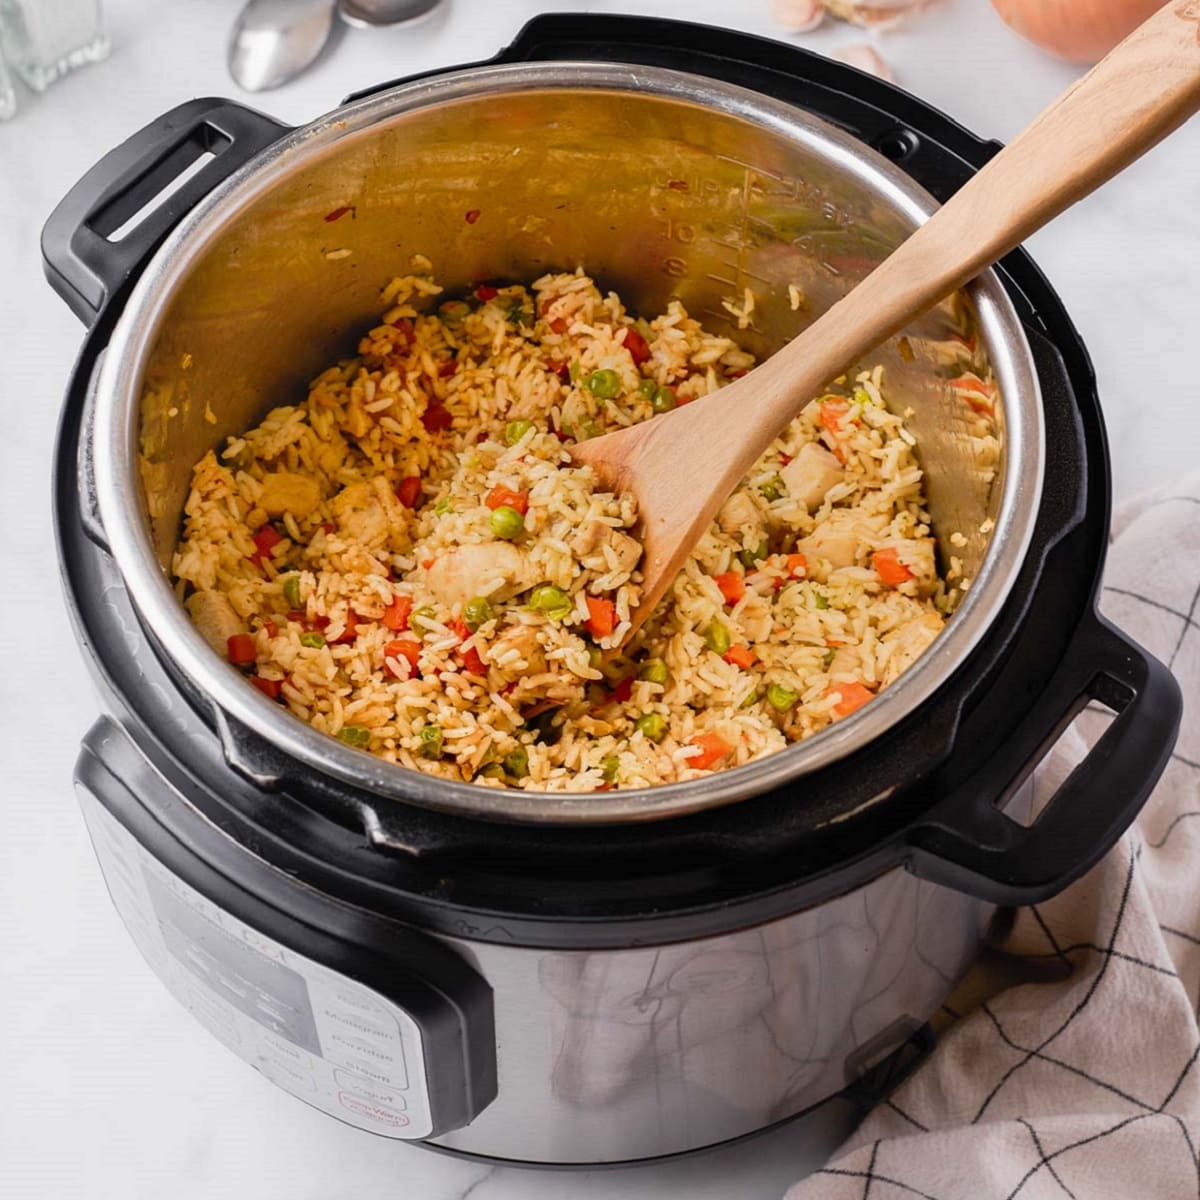 How To Cook Rice And Chicken In A Slow Cooker